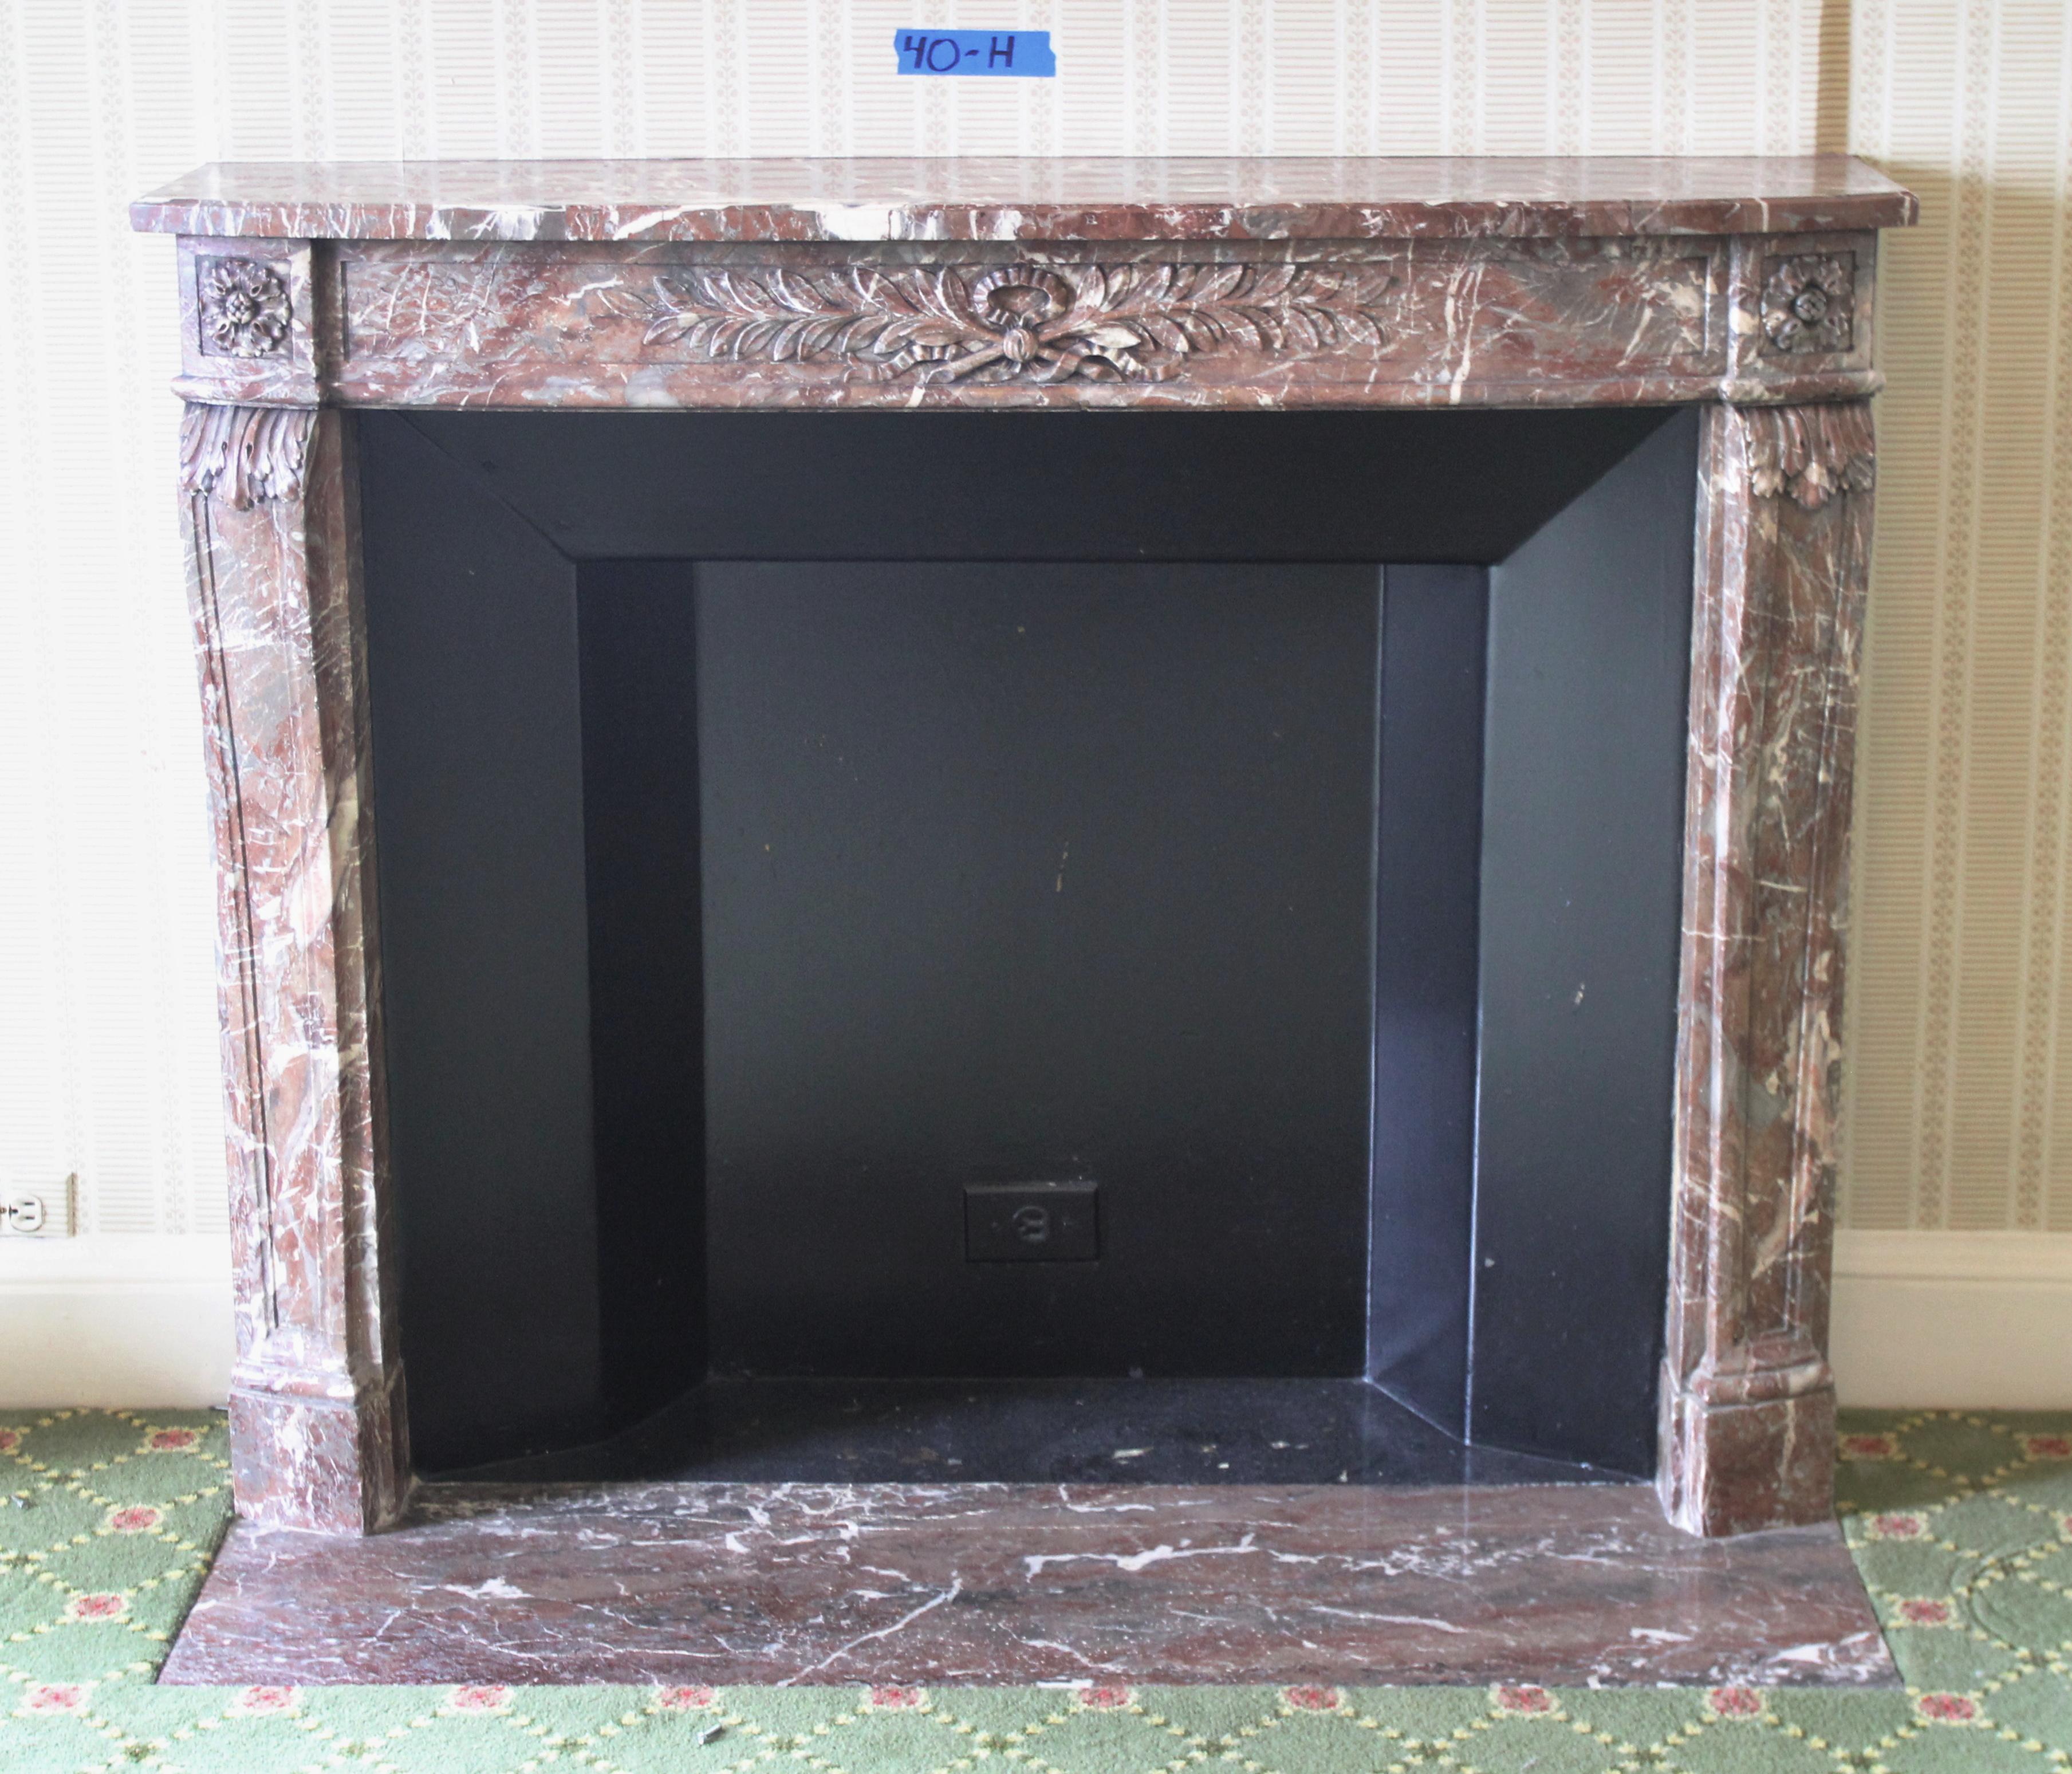 Hearth not available.
Exquisite Louis XVI Regency carved marble mantel, exuding timeless elegance. Originally imported from France, this magnificent mantel was destined for the Waldorf Astoria Hotel and became a part of its allure circa 1930. Its